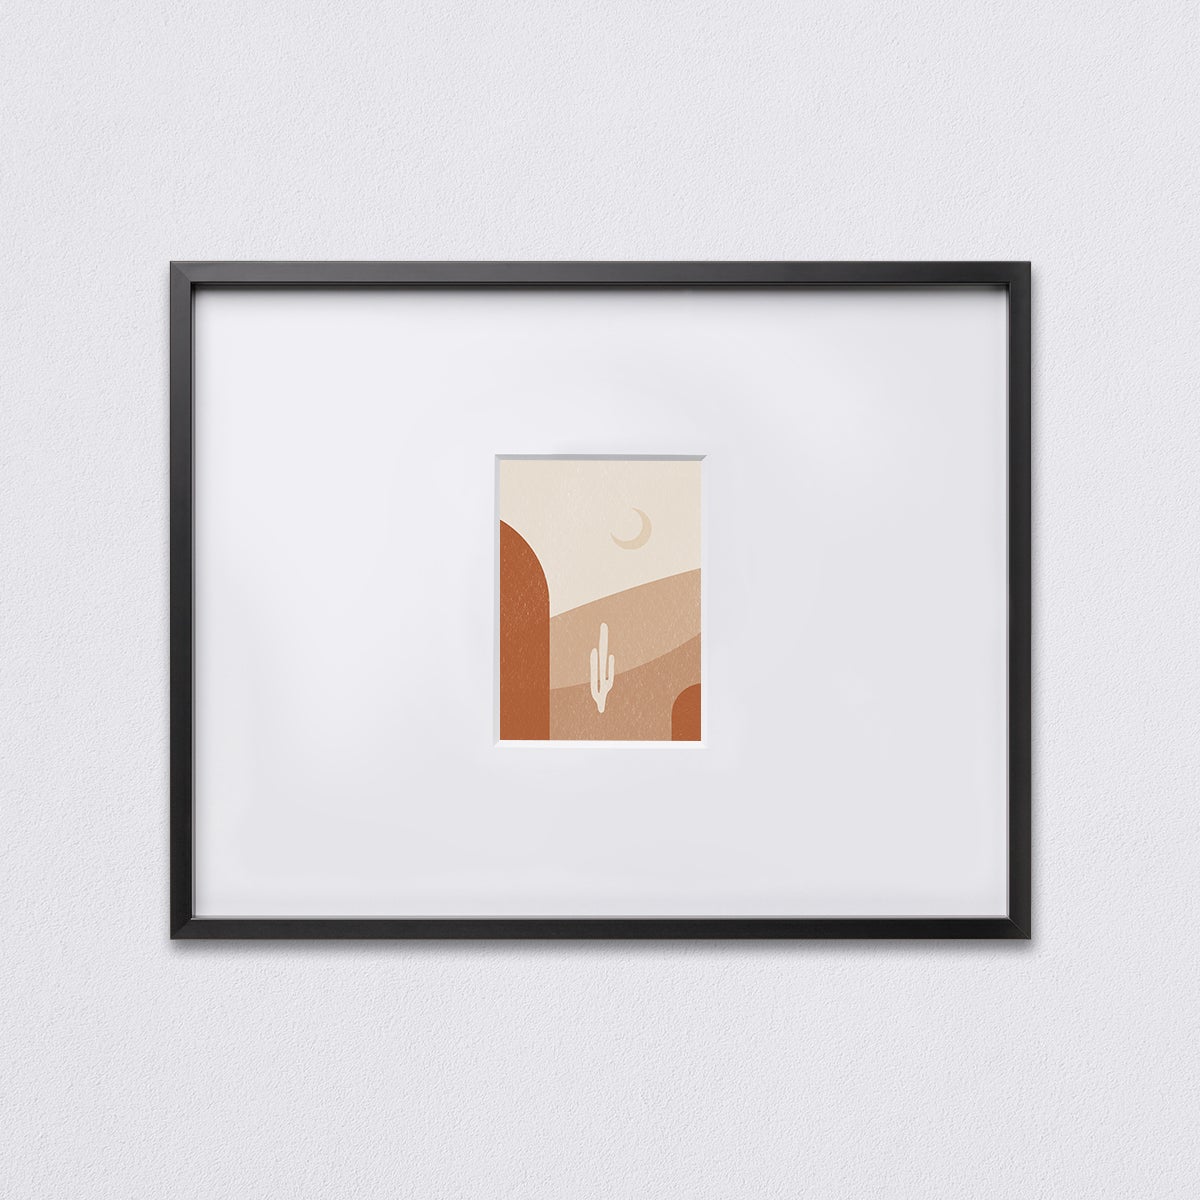 Simple, gradient image of cactus in the desert matted to 5 x 7 inch inside a Black 20 x 16 inch Modern Metal Frame from Artifact Uprising